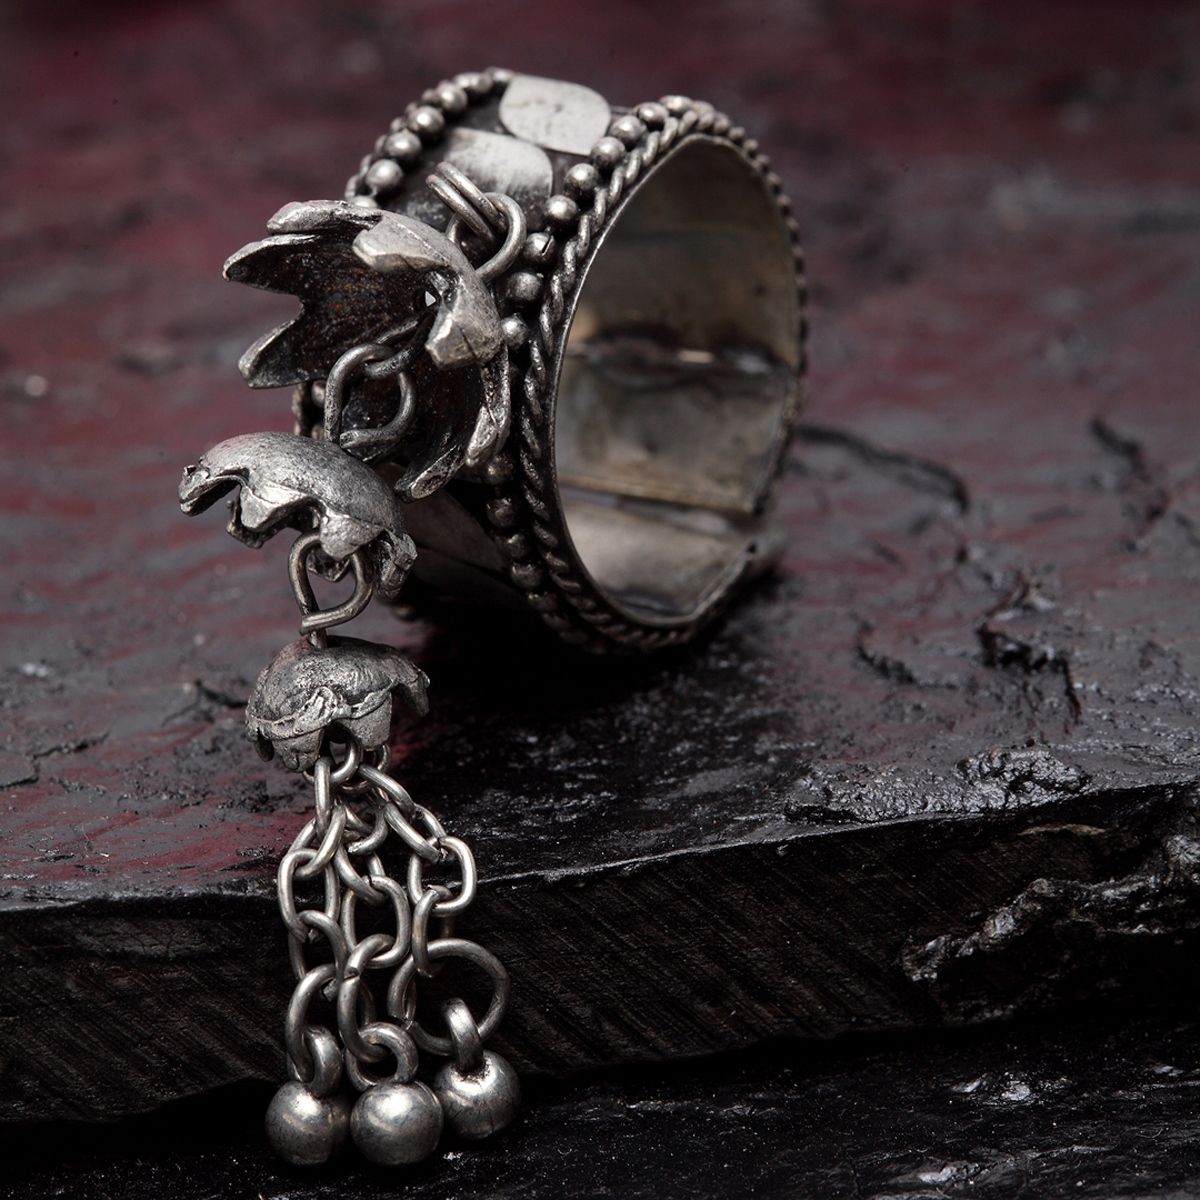 Bird Oxidised Silver Adjustable Ghungroo Finger Ring | FashionCrab.com |  Jewelry online shopping, Bold statement jewelry, Silver